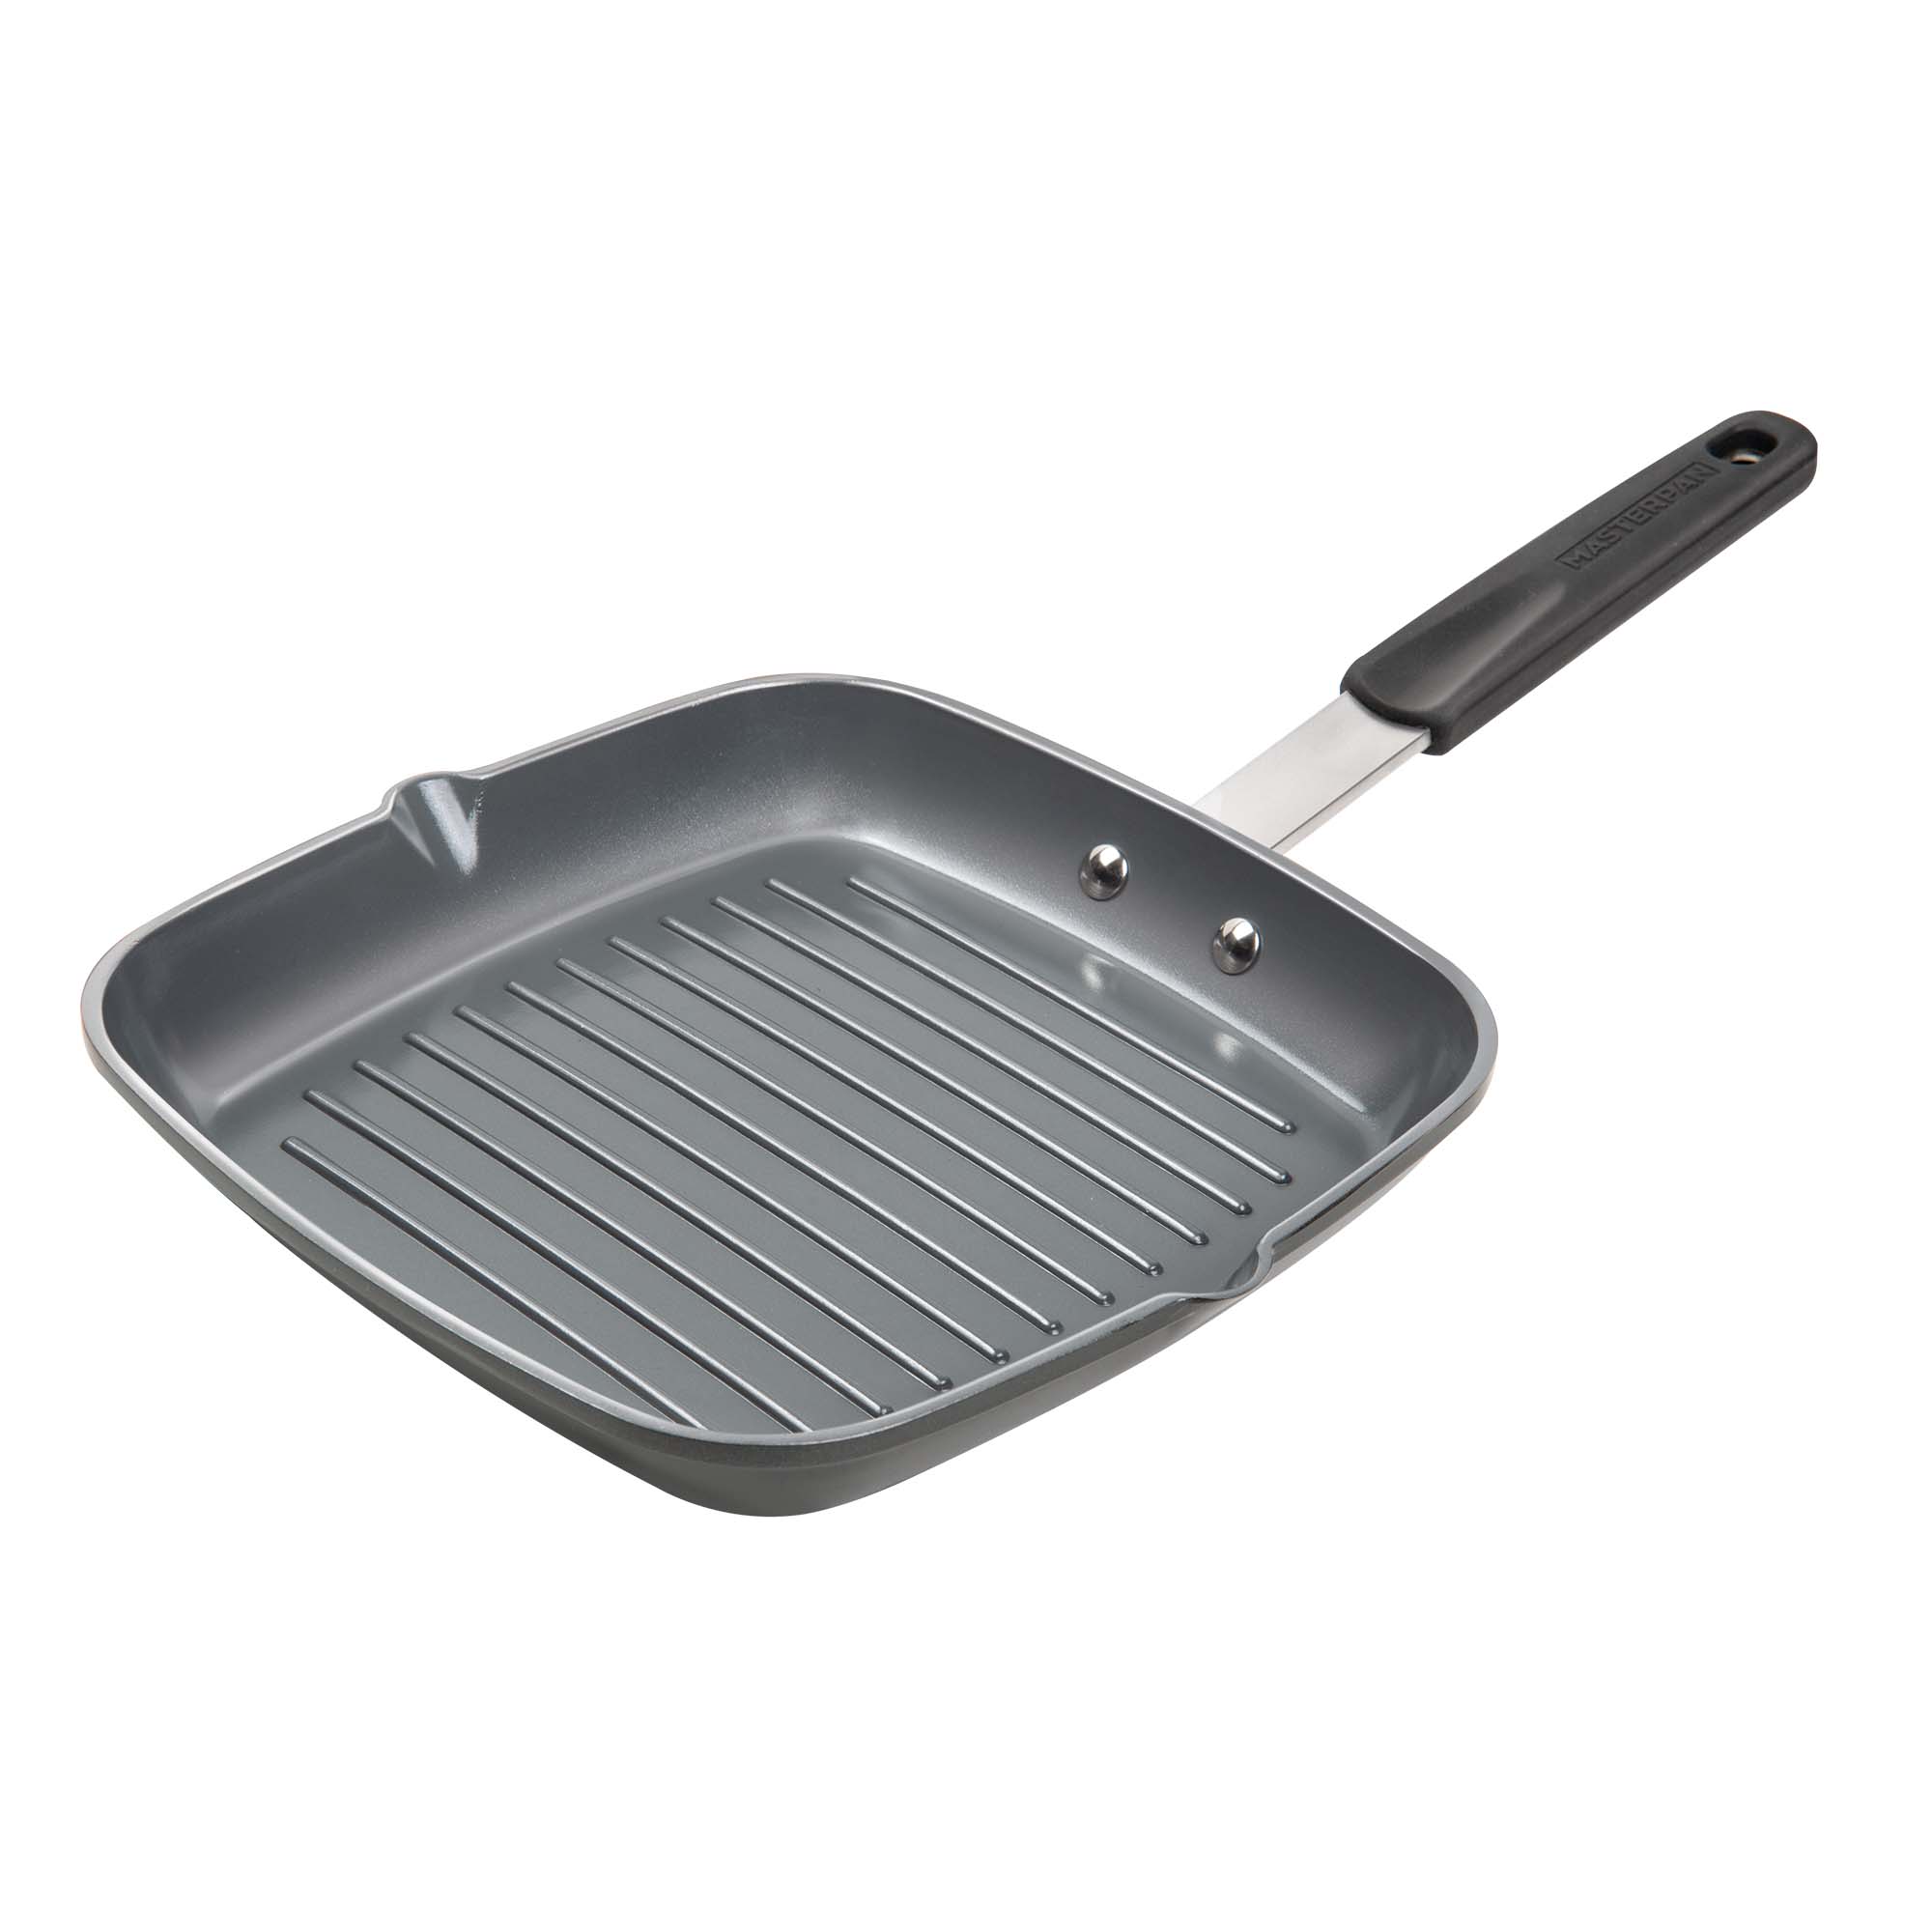 Top Notch Material: Pampered Chef Nonstick Double Burner Griddle